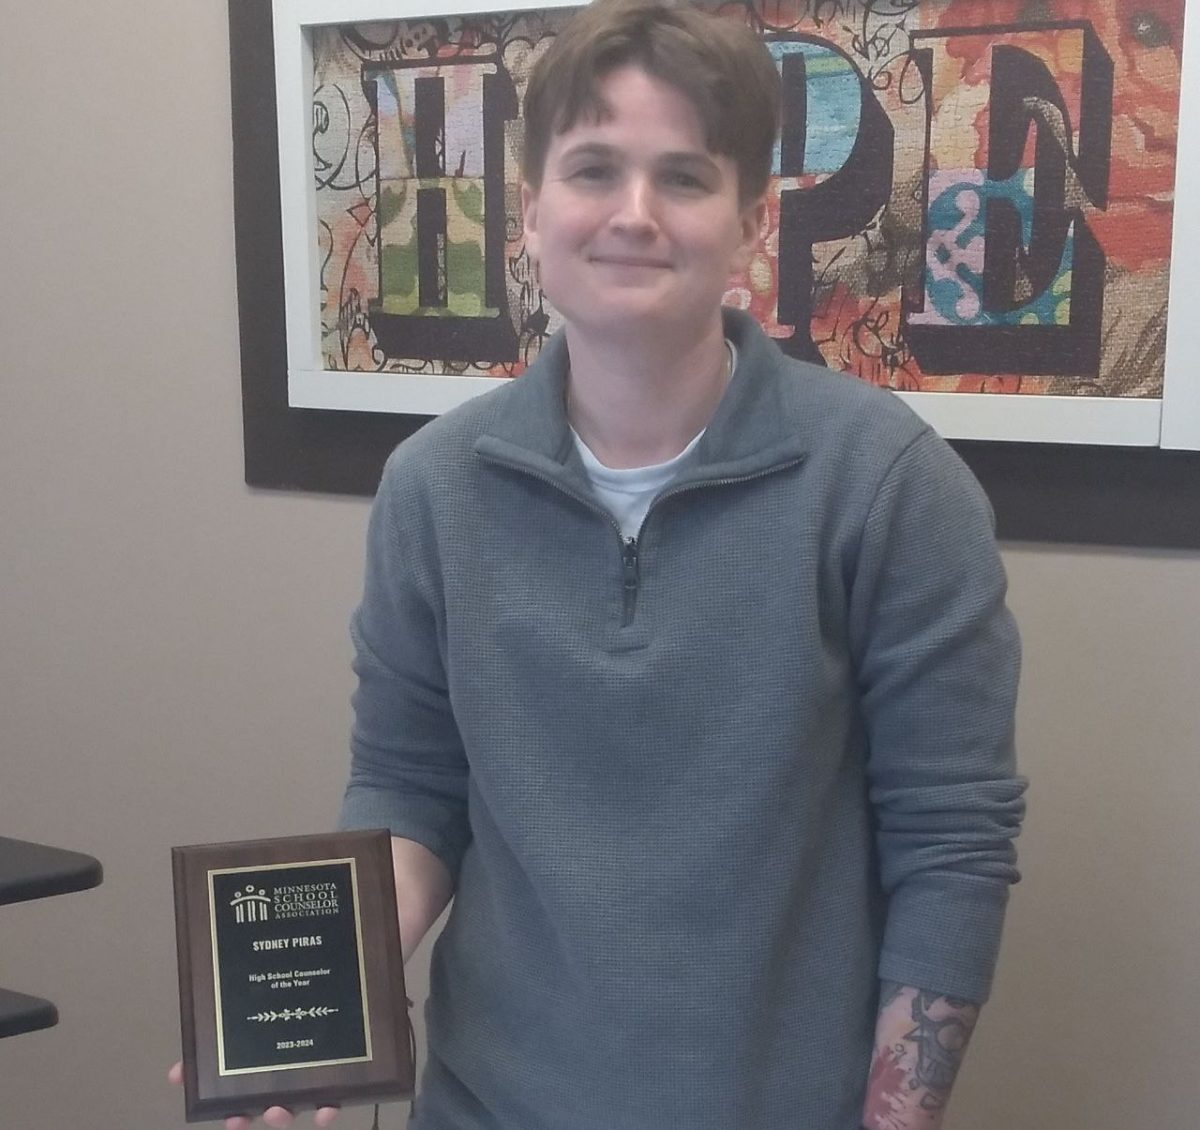 Counselor Sydney Piras holds the plaque she received when being named High School Counselor of the Year by the Minnesota School Counselor Association. Over her years as a school counselor, Piras has worked hard and  helped both students and schools grow.